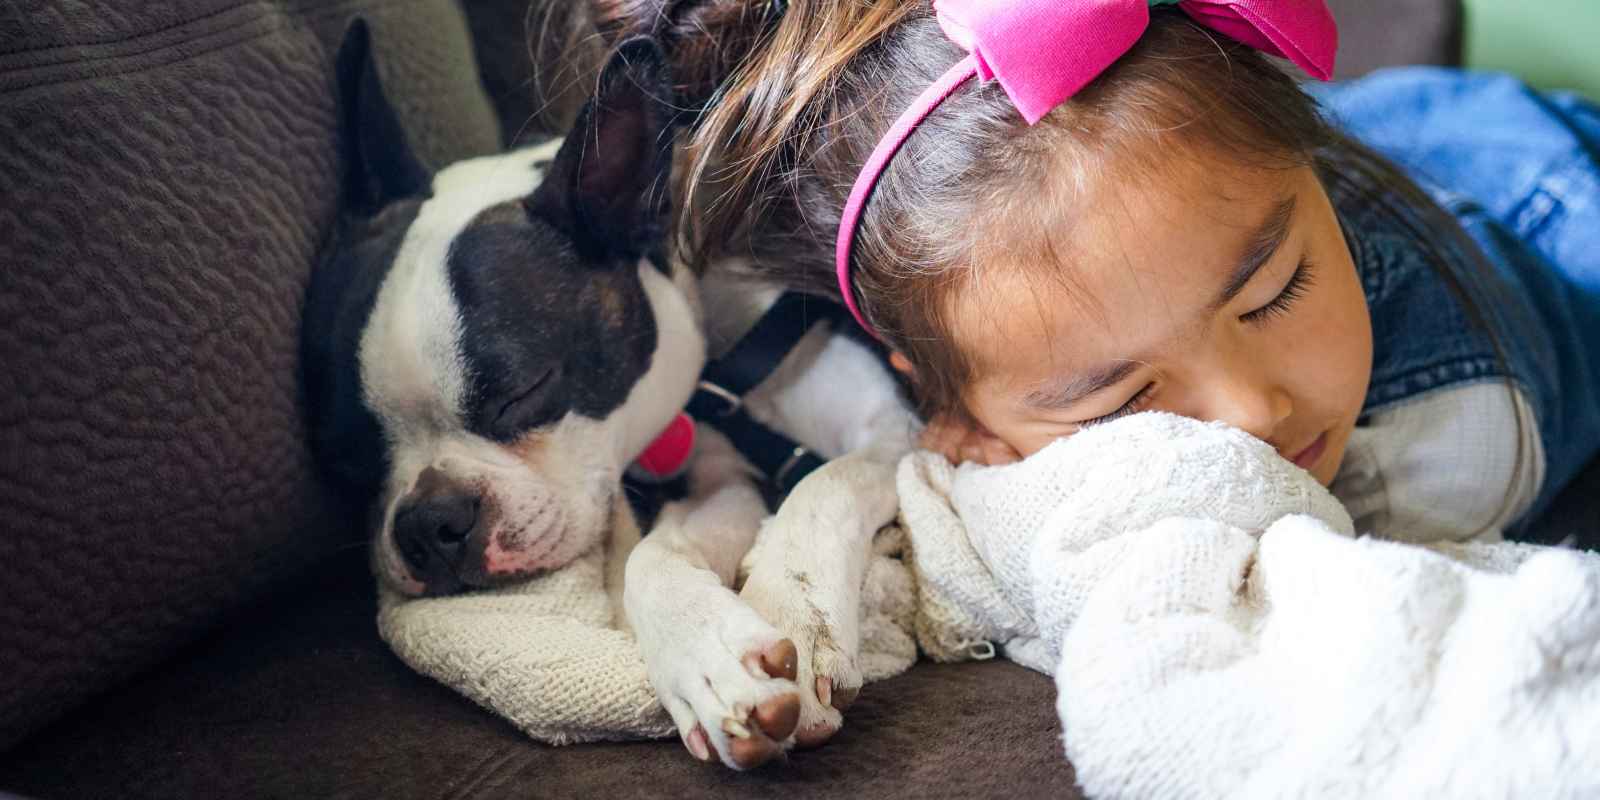 Photo of a child wearing a pink bow asleep on a brown couch next to a small, black and white dog.